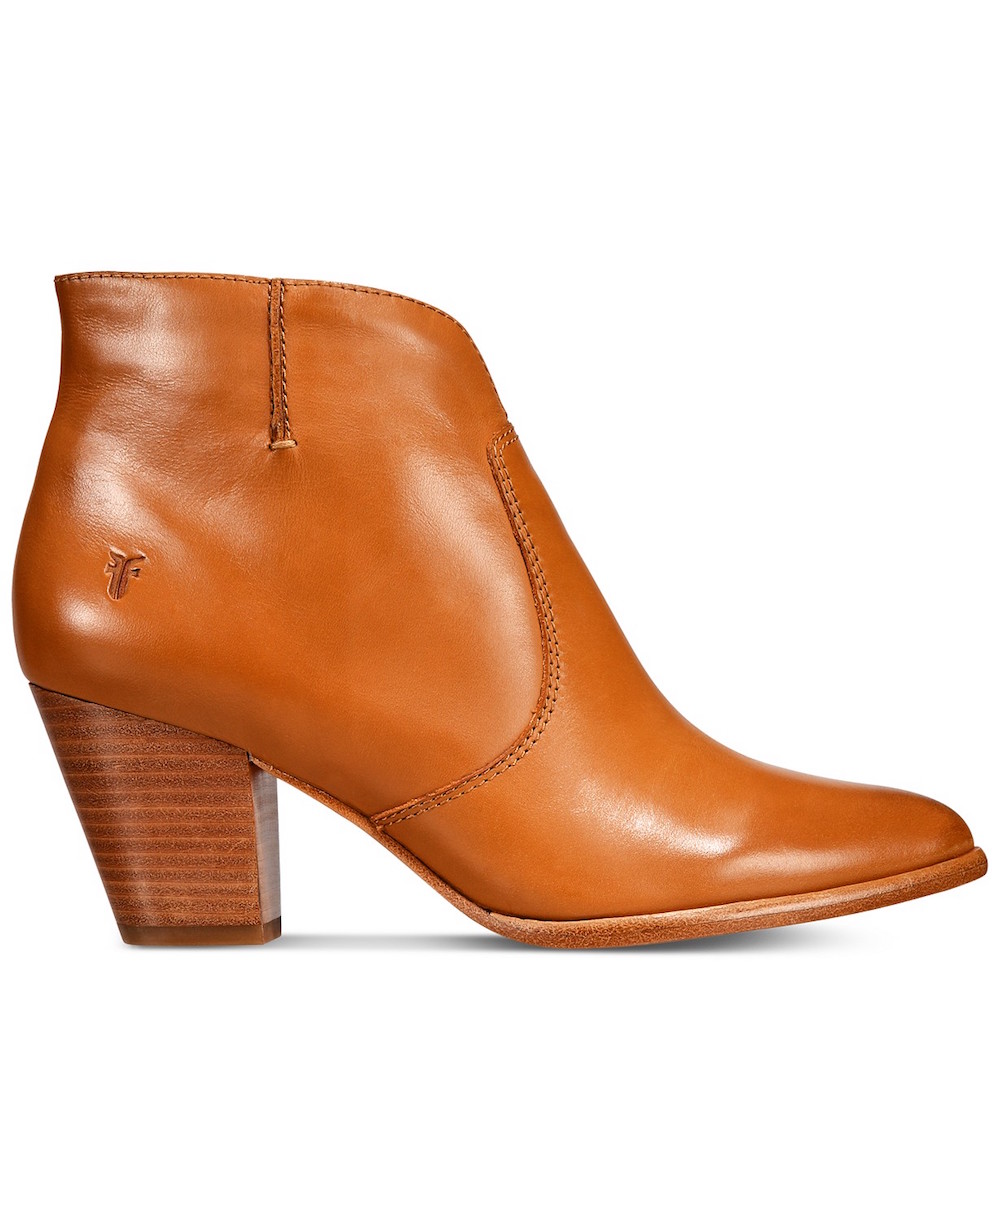 Frye Womens Jennifer Bootie Leather Pointed Toe Ankle Fashion, cognac